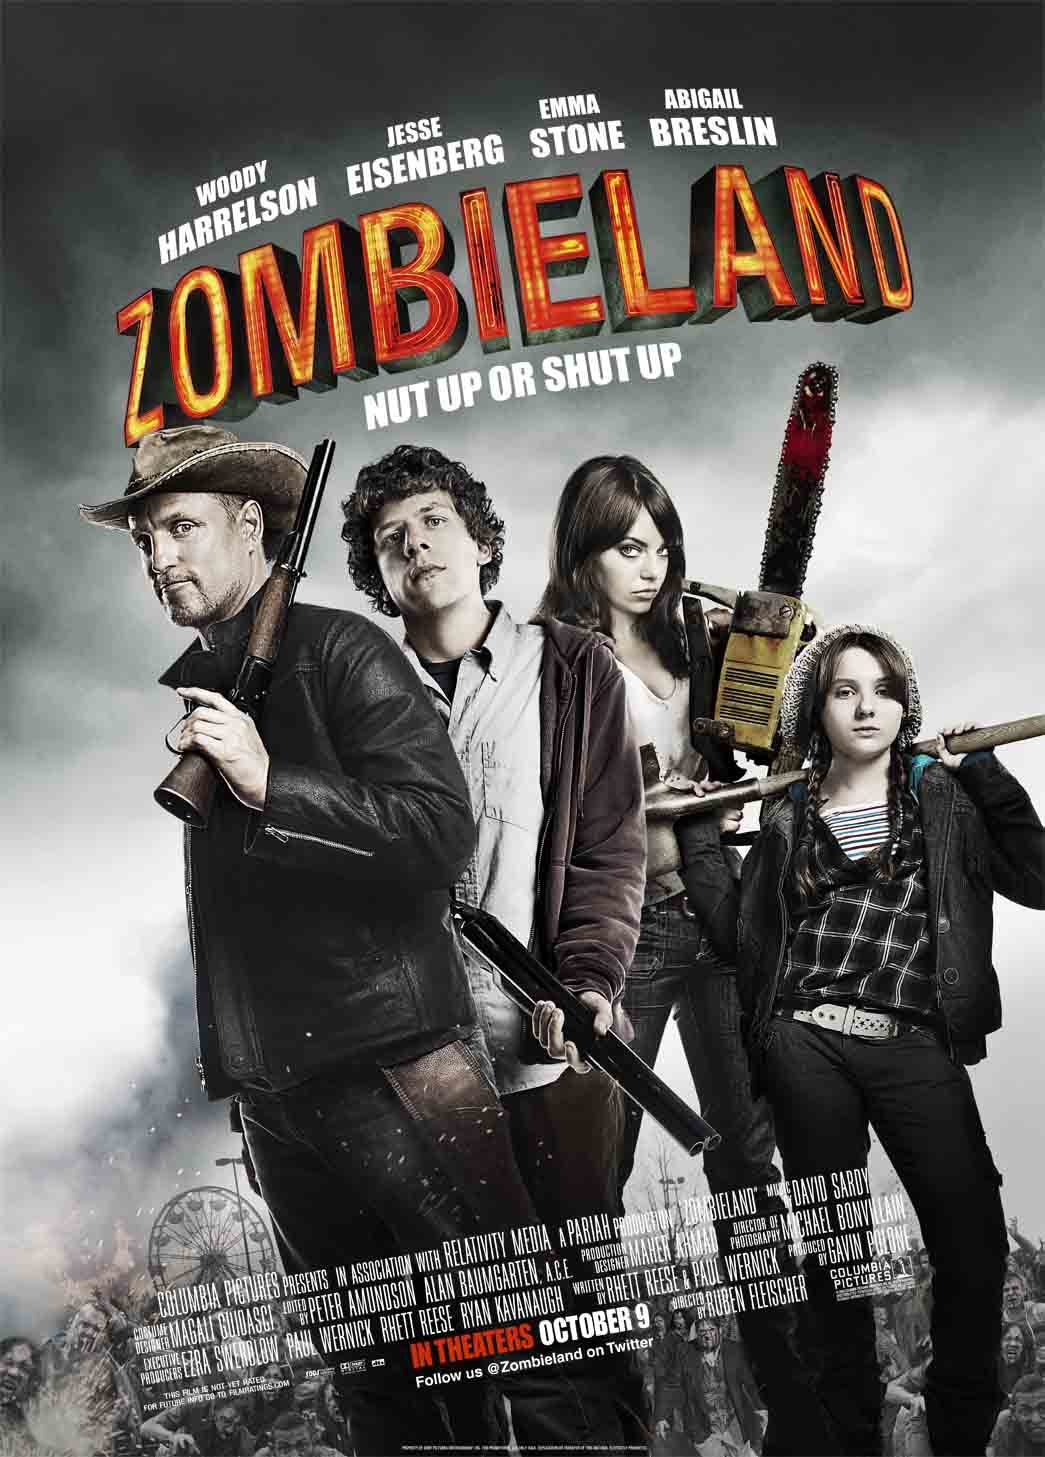 Columbus, a college student, joins forces with three eccentric strangers to survive a zombie apocalypse and travel through the south-western USA to a safe haven.